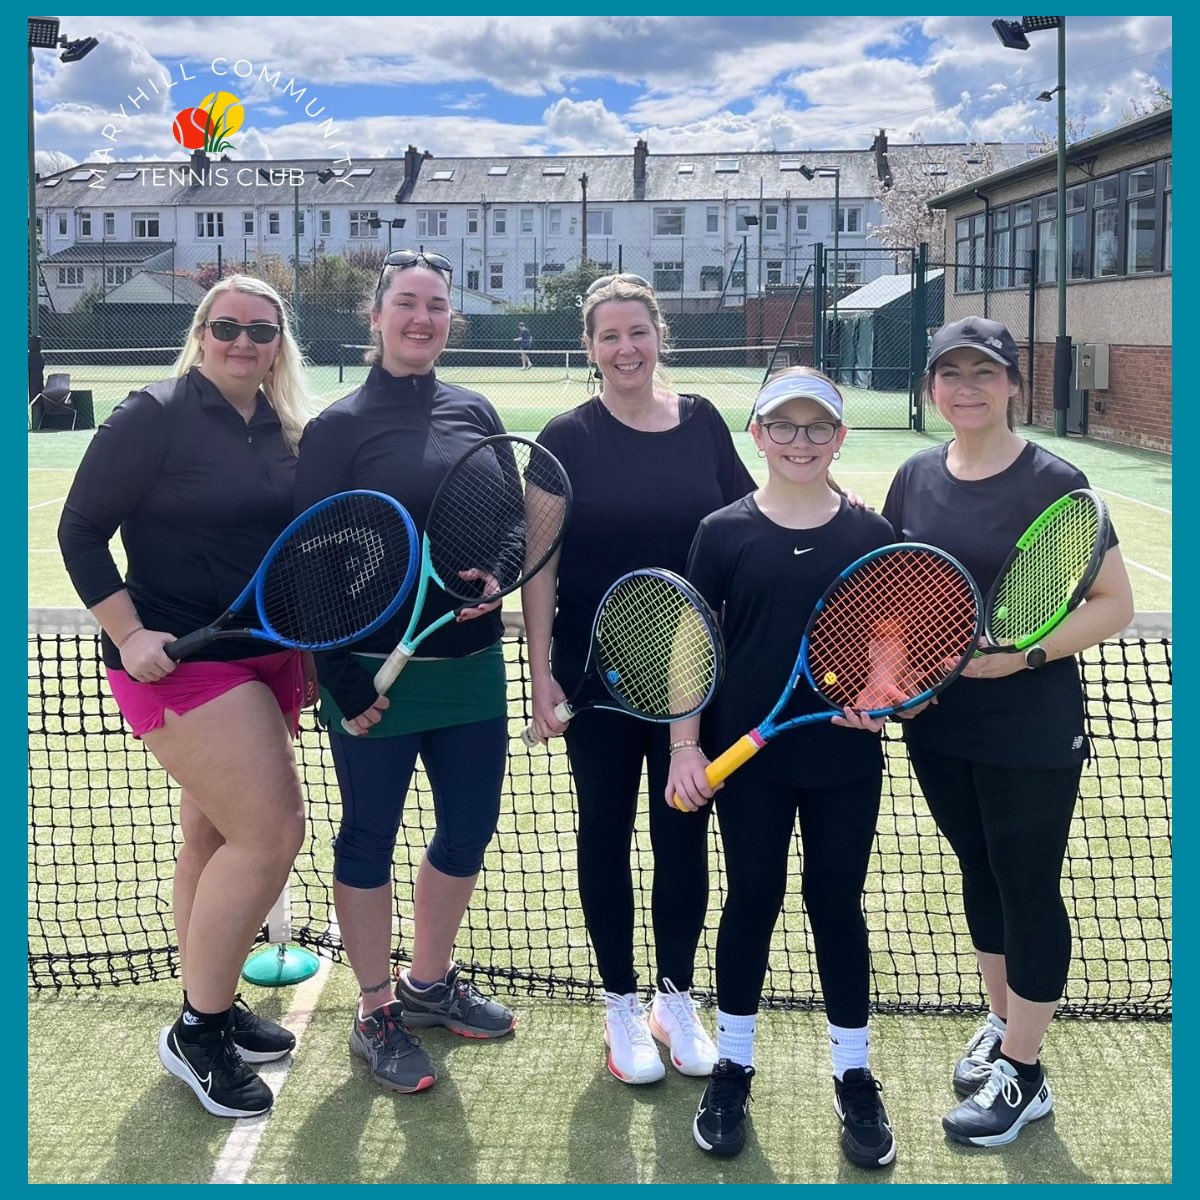 Well done to our W1 team (not all pictured) 🫶. 
A 3-6 WIN against Rutherglen W6 in the Summer league. 
Lots of fabulous tennis & competitive games for all. 🙌⭐️👏🎾.
Great job team!
#teammctc
#growingthegame
#maryhilltennis